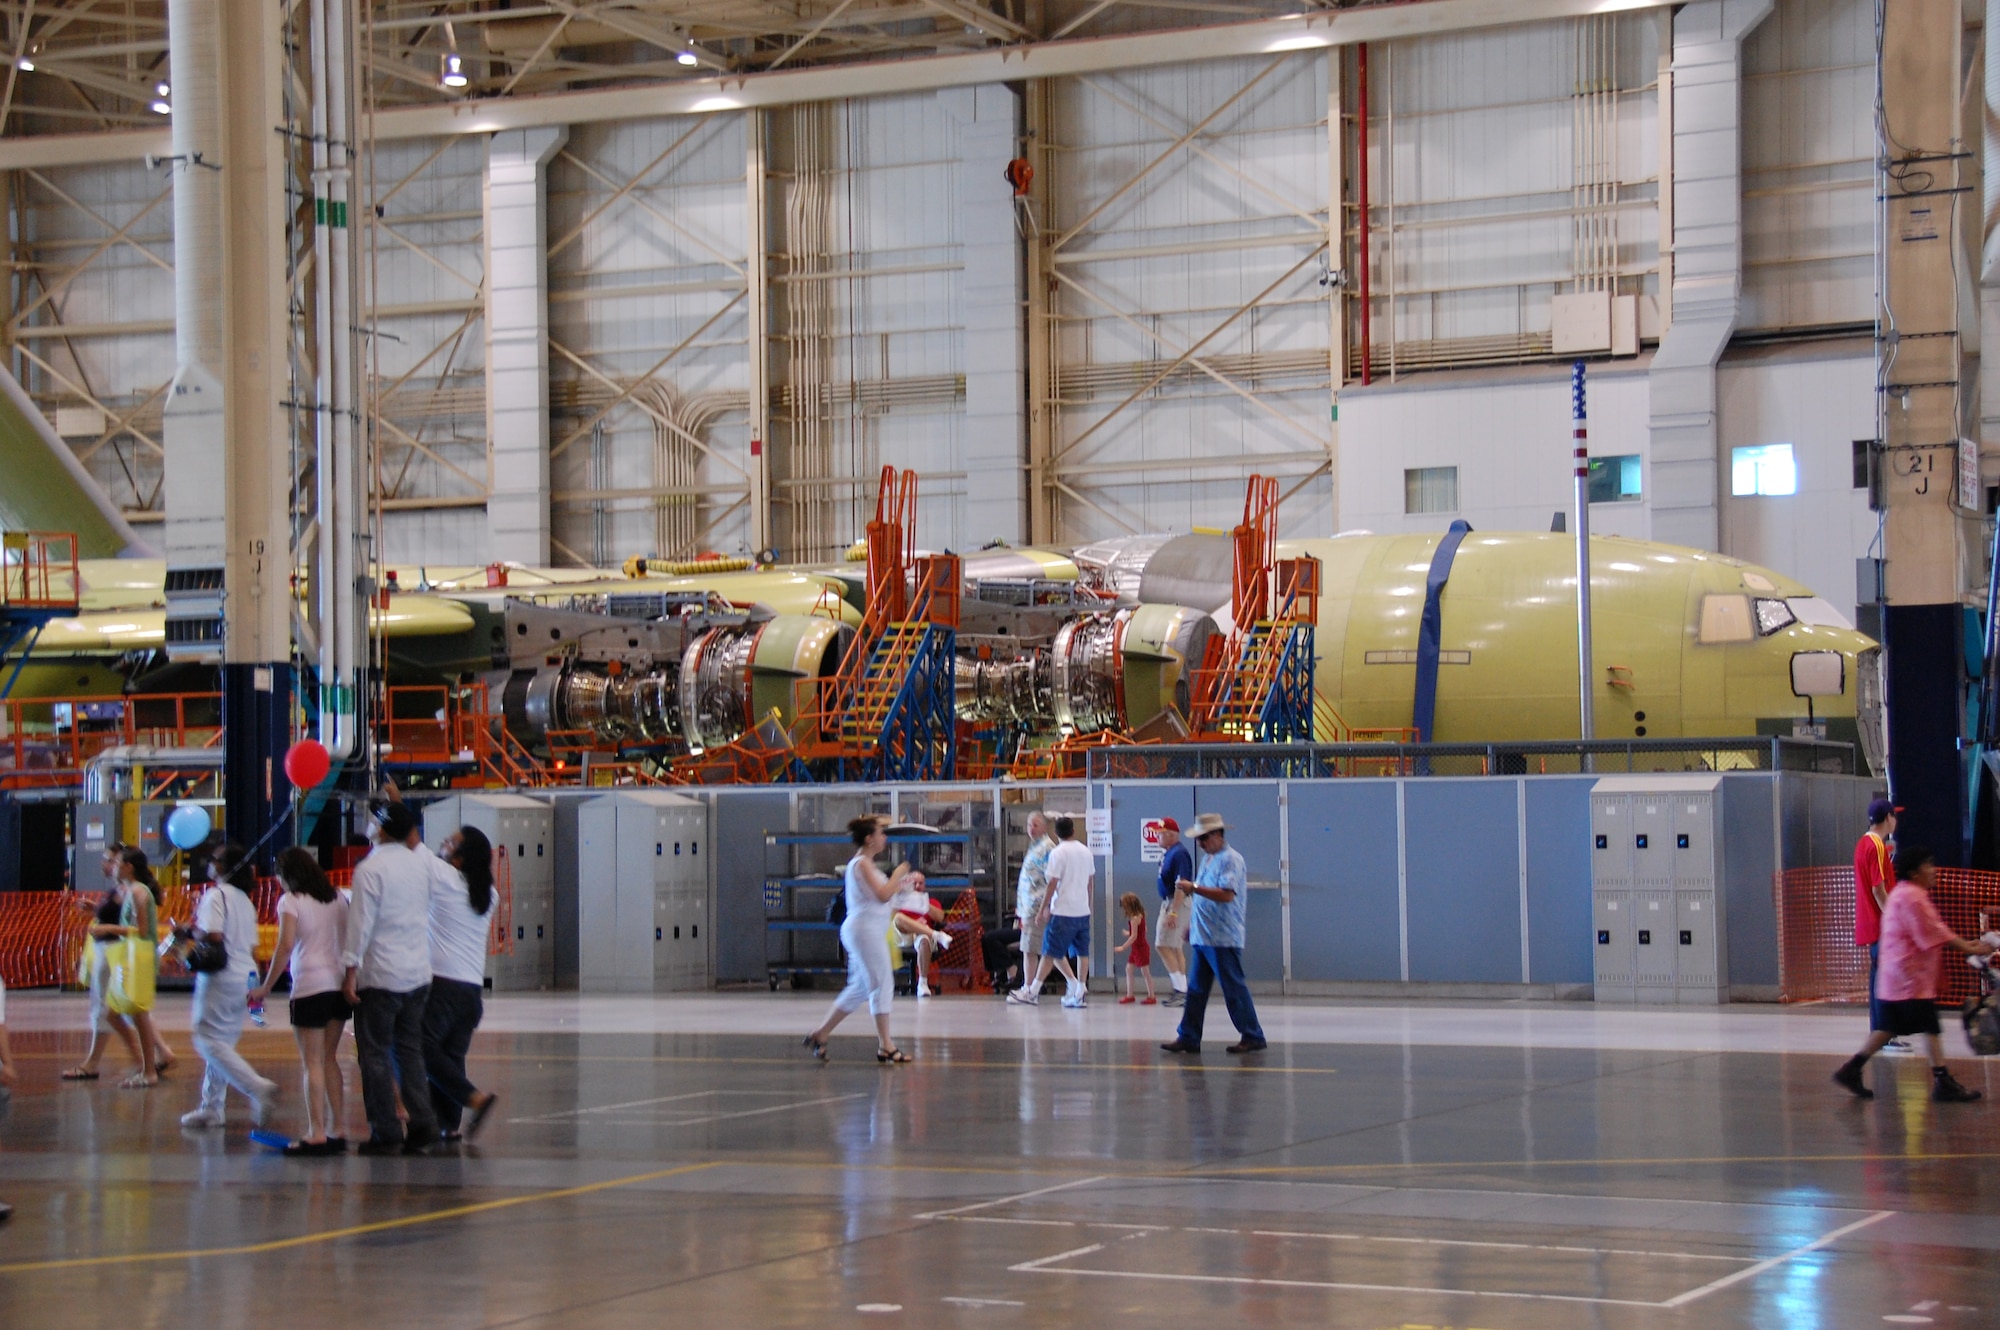 The engines and flaps are installed on P-177 as vistors tour the Boeing Long Beach plant during an open house June 22, 2008.  Assembly of P-177 began Nov. 19, 2007 and continued through Sept. 11, 2008, when it was officialy accepted by Brig. Gen. Barbara Faulkenberry, deputy director of Strategic Plans, Requirements, and Programs at Headquarters Air Mobility Command.  The aircraft was the 177th C-17 Globemaster III delivered to the U.S. Air Force. (Courtesy photo)